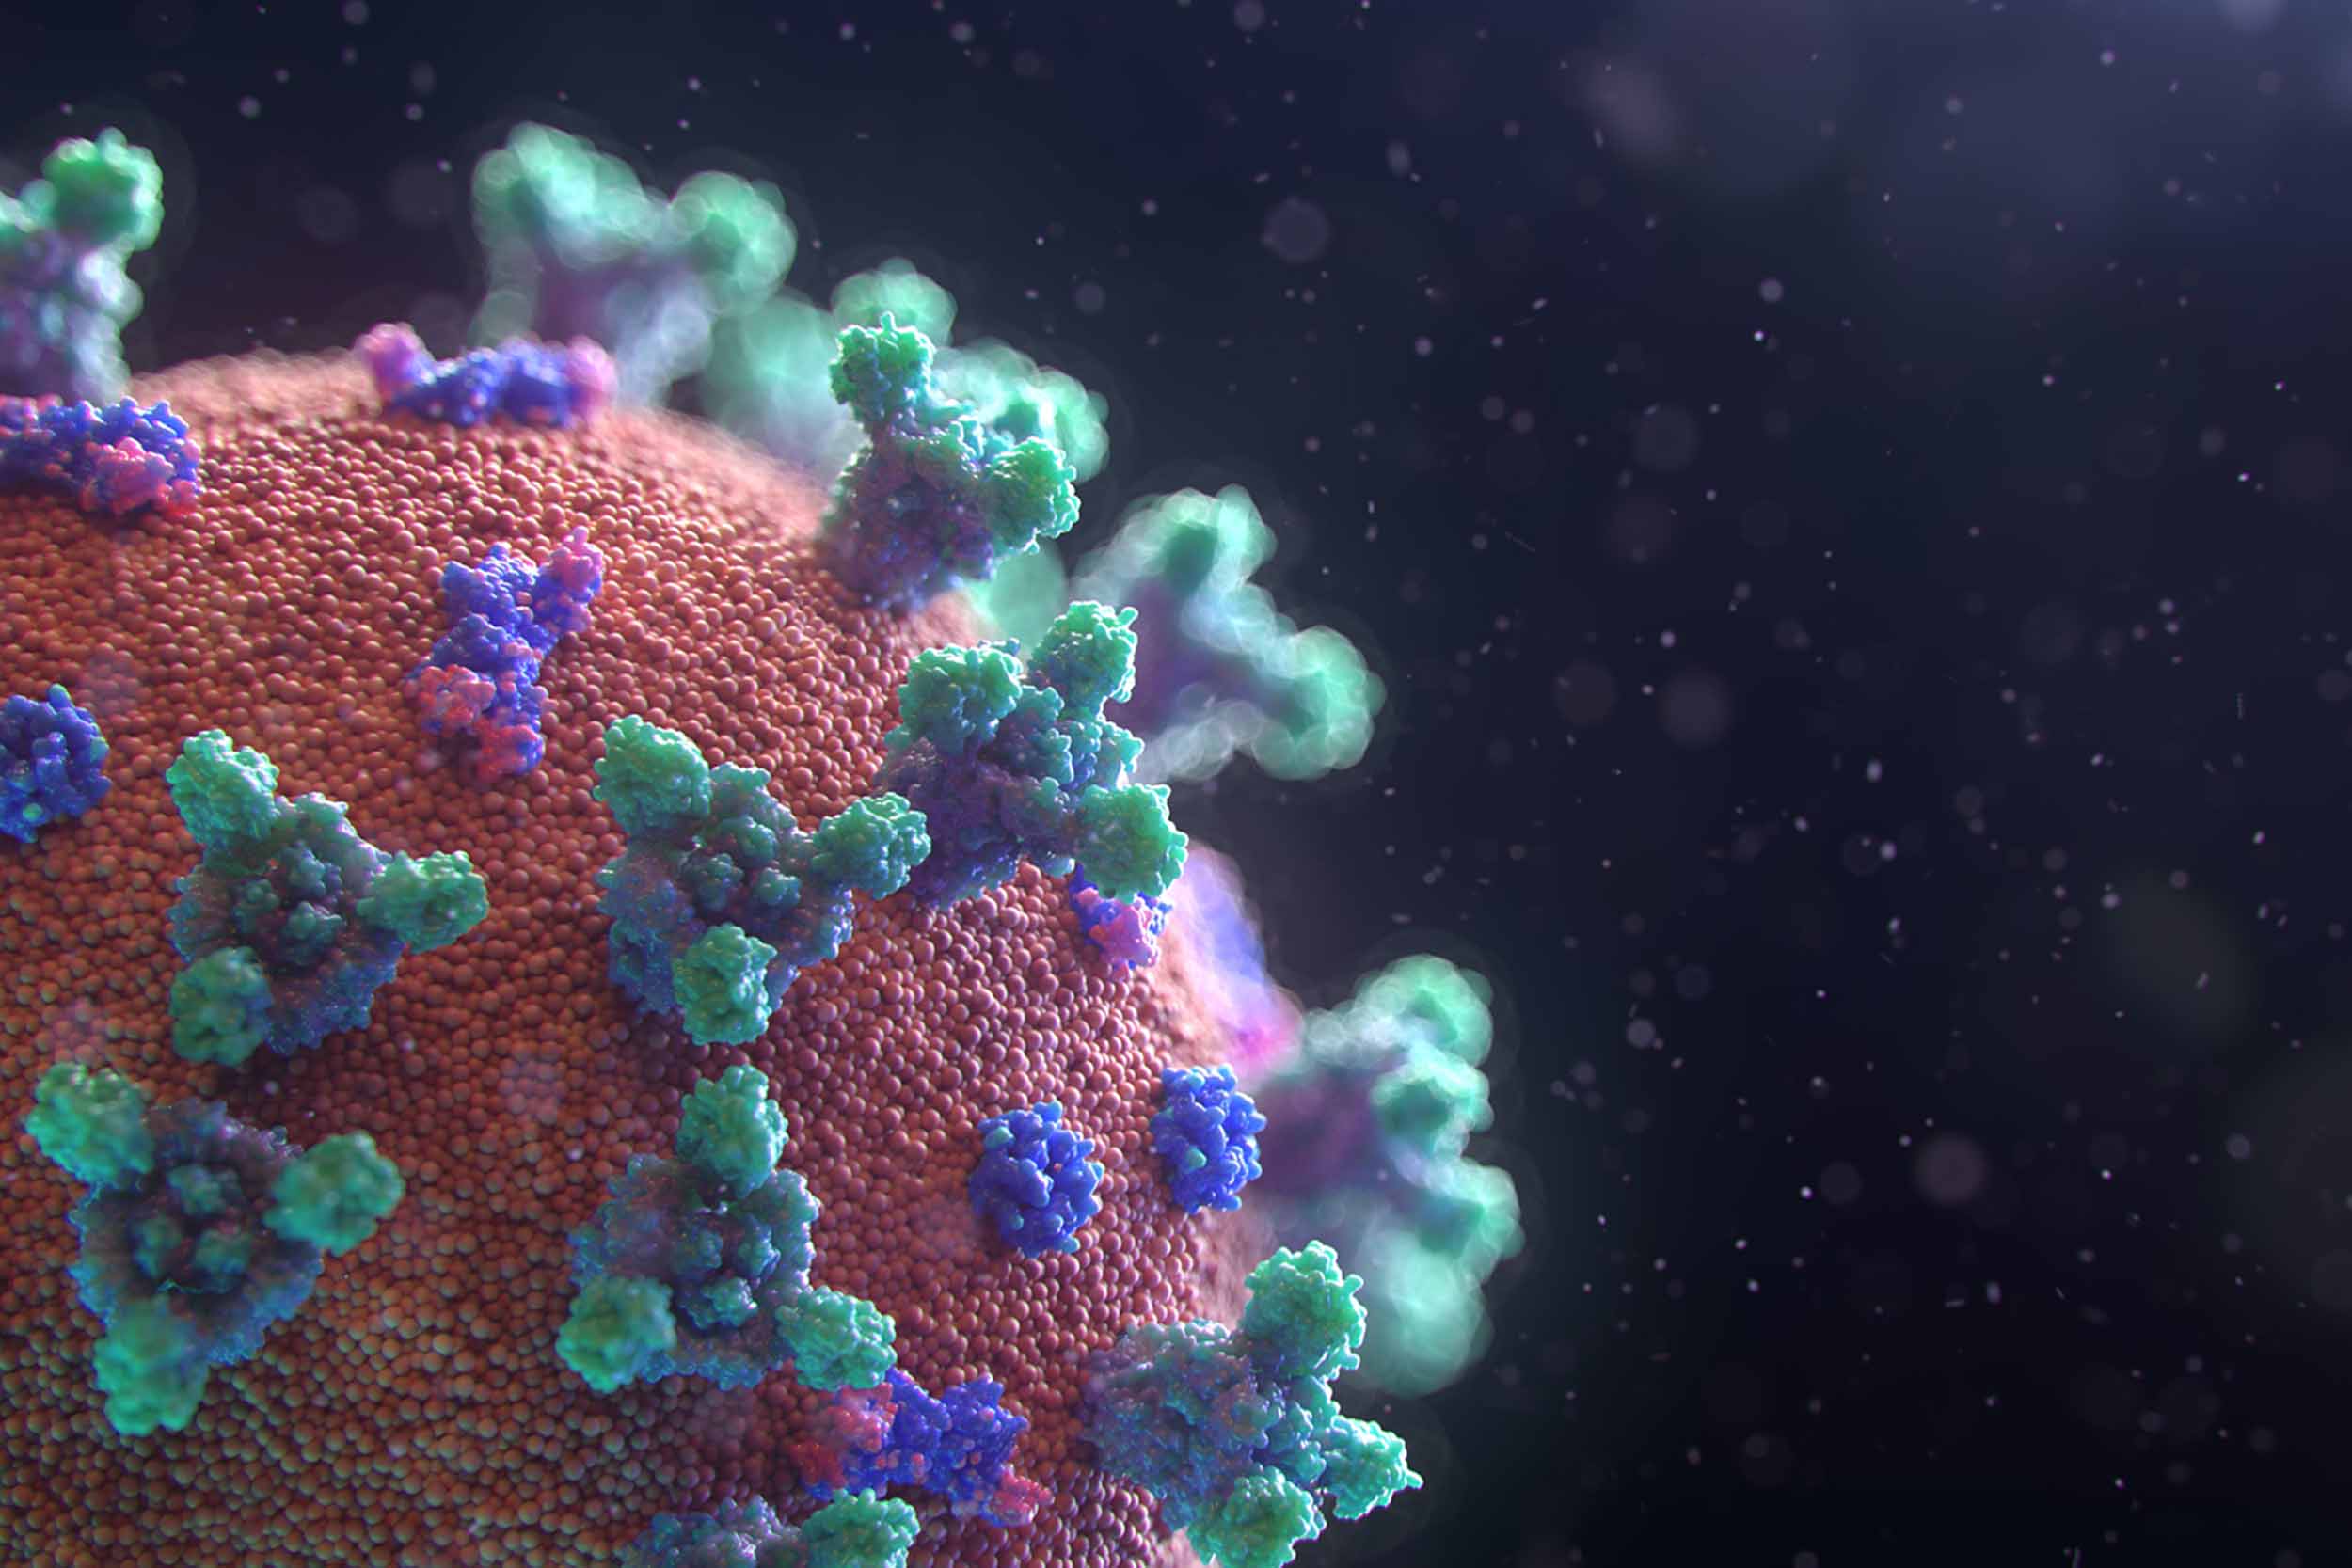 Colorful close up of an artist's rendering of a COVID-type virus